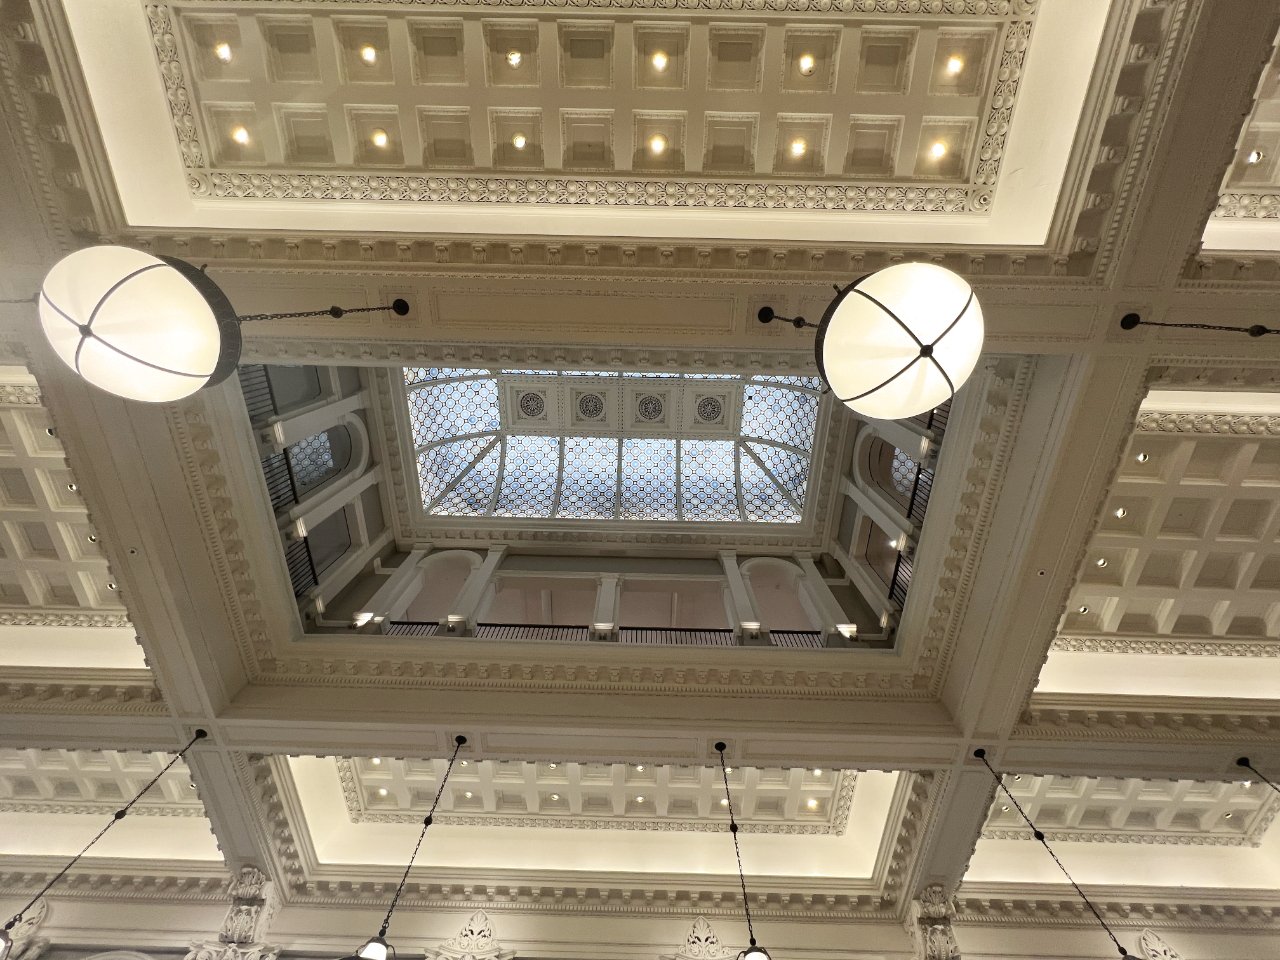 You could see that original skylight when it was a bookstore, but Apple made it a bigger feature